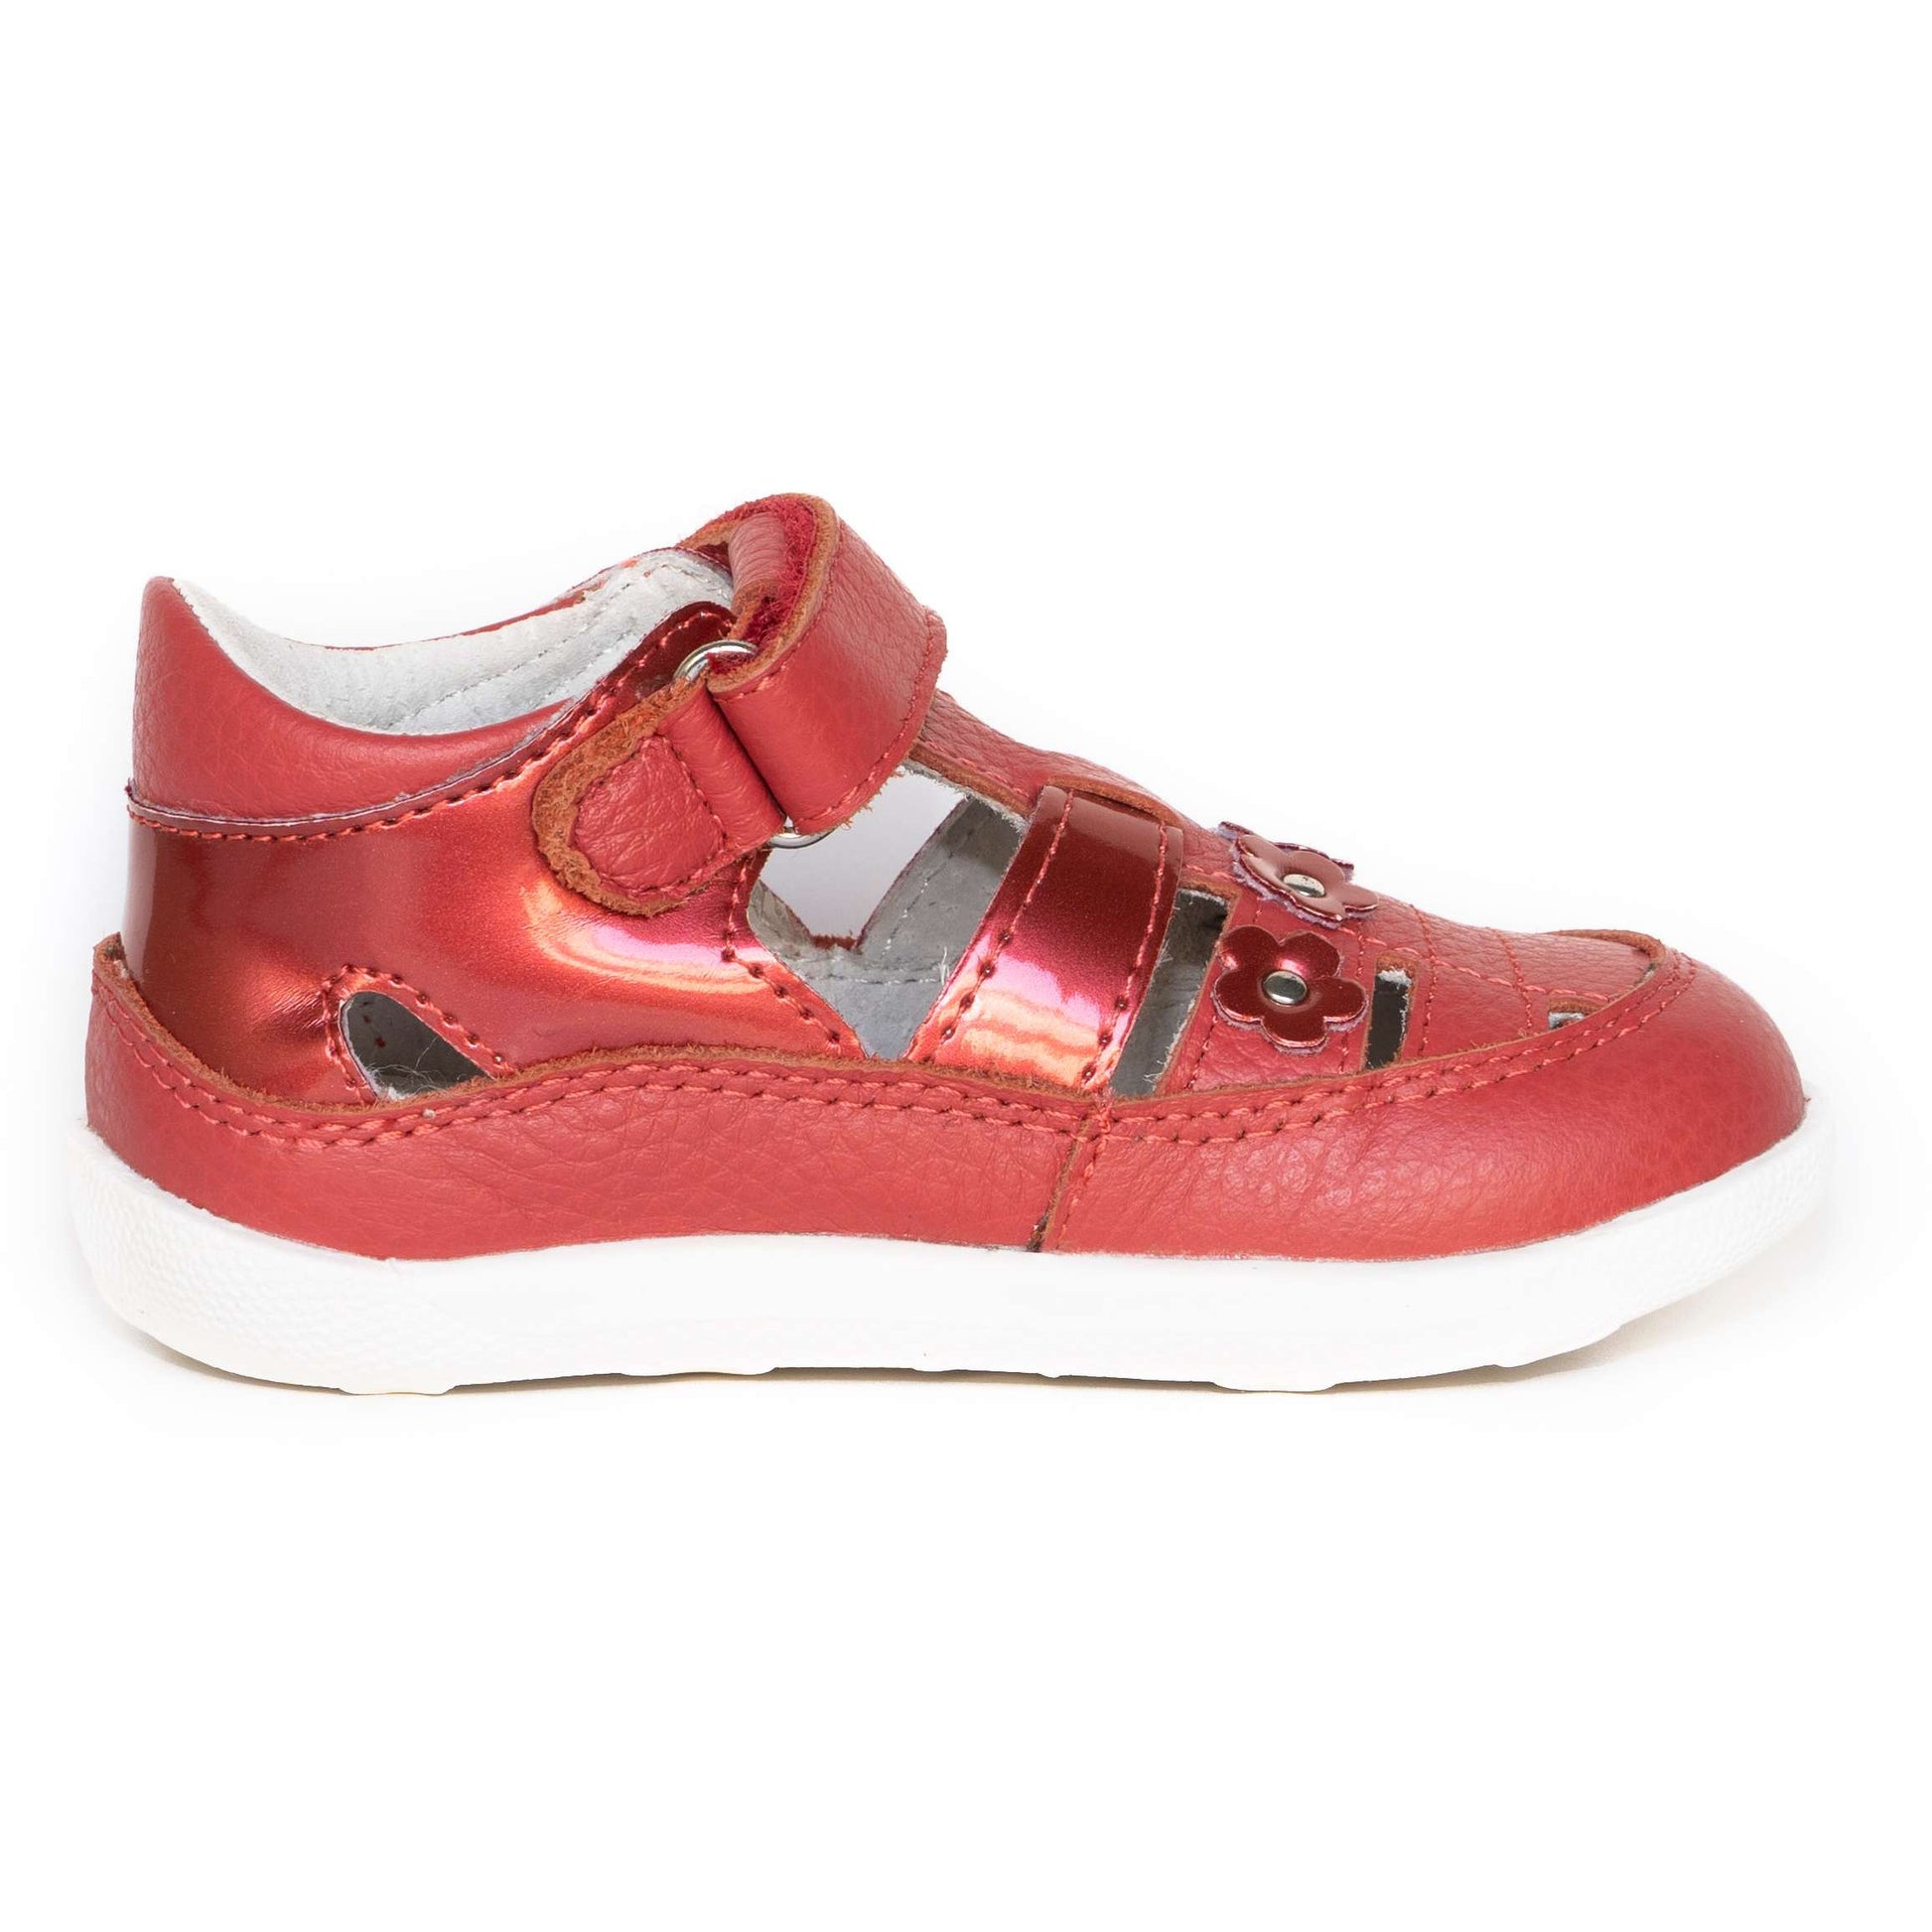 Red sandals, or shoes, for toddler girls, have a leather on the inside and in the upper. Smooth leather is easy to clean with a wet cloth.